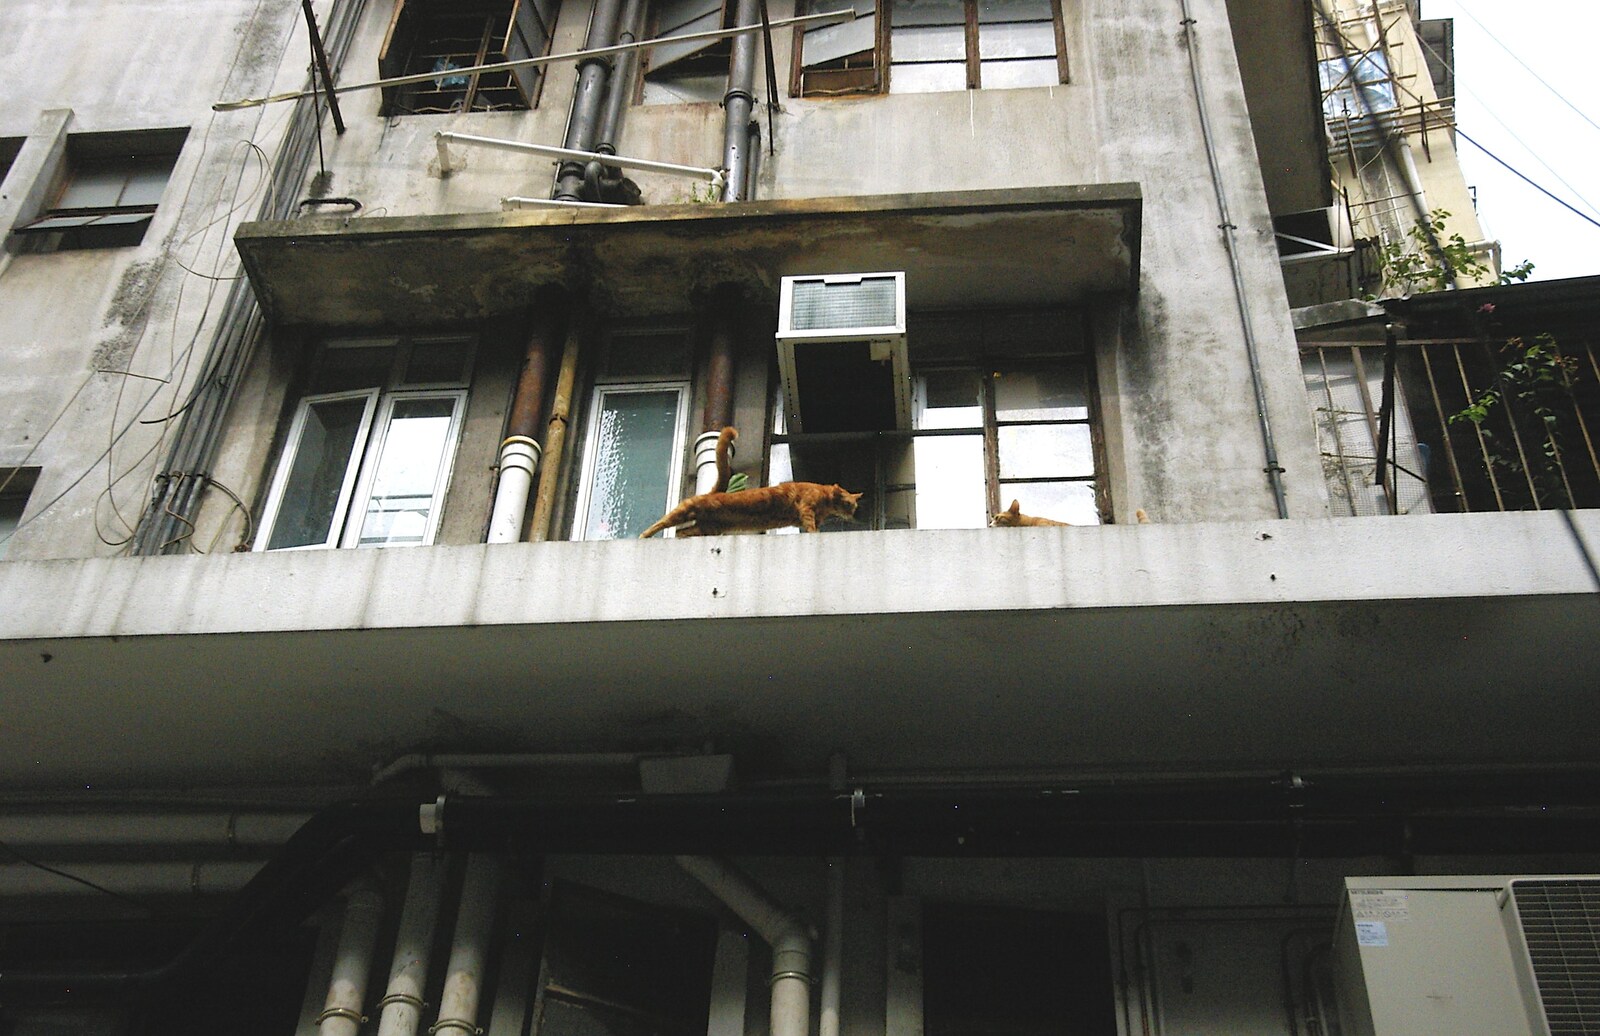 A cat stretches, up on a balcony from Lan Kwai Fong Market, Hong Kong, China - 4th October 2006